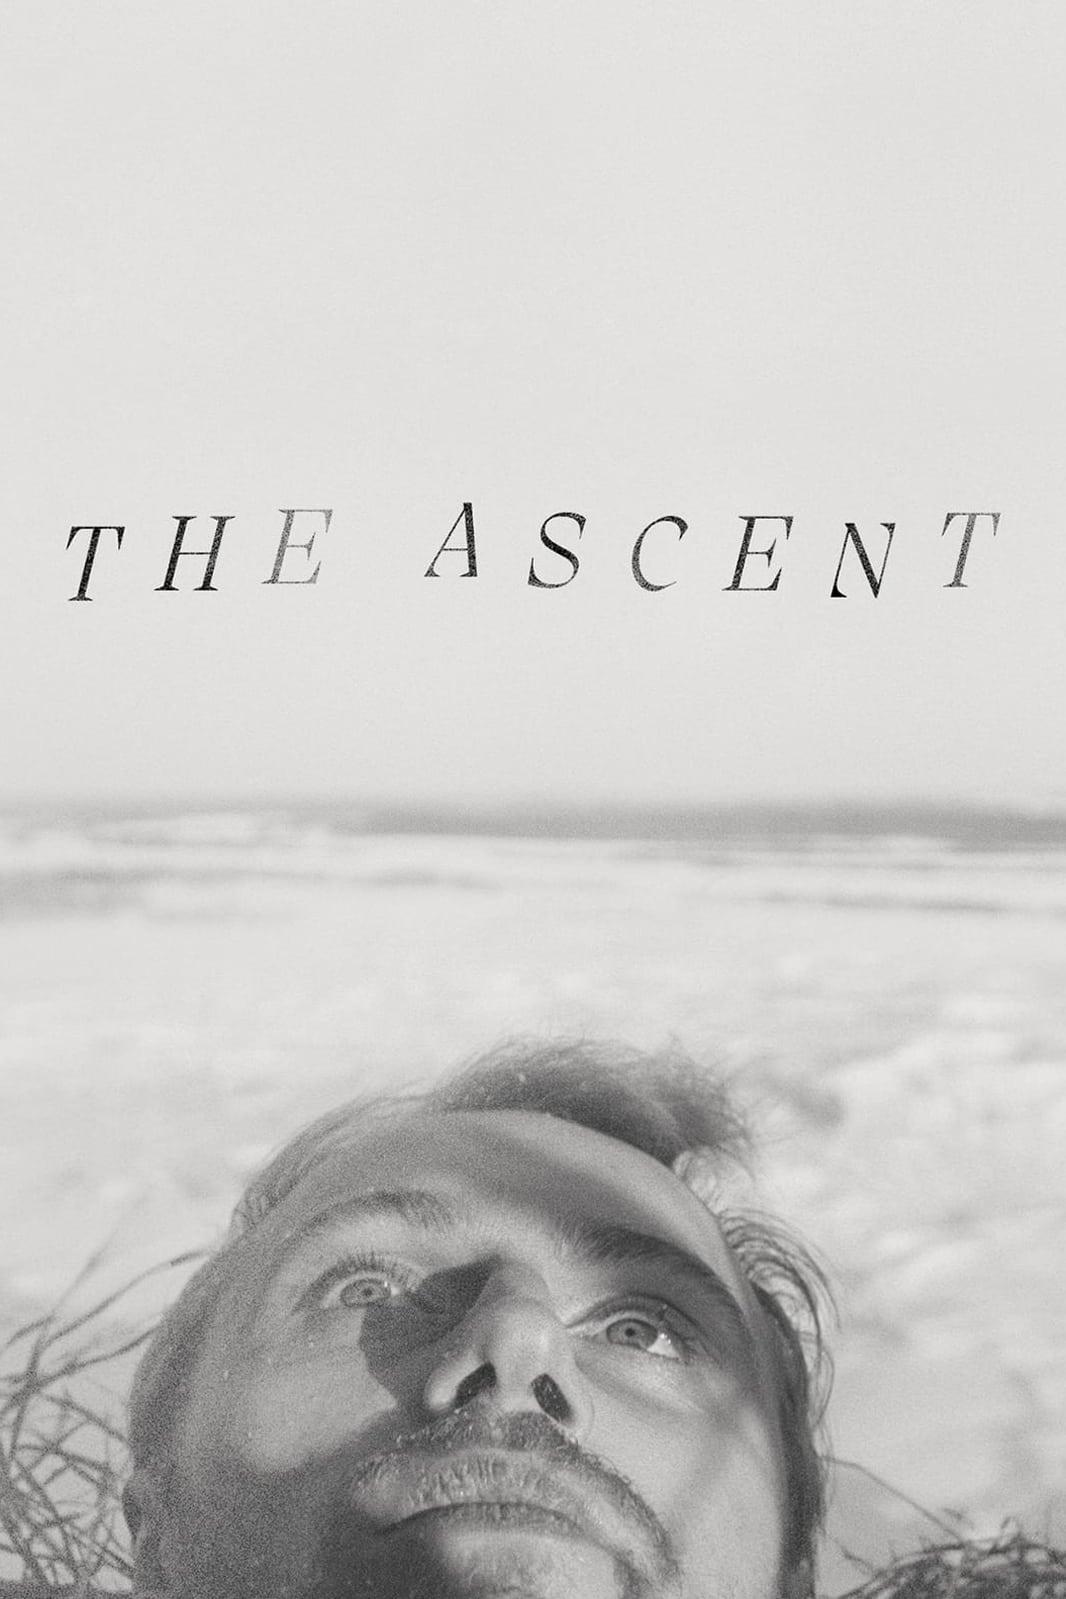 The Ascent poster